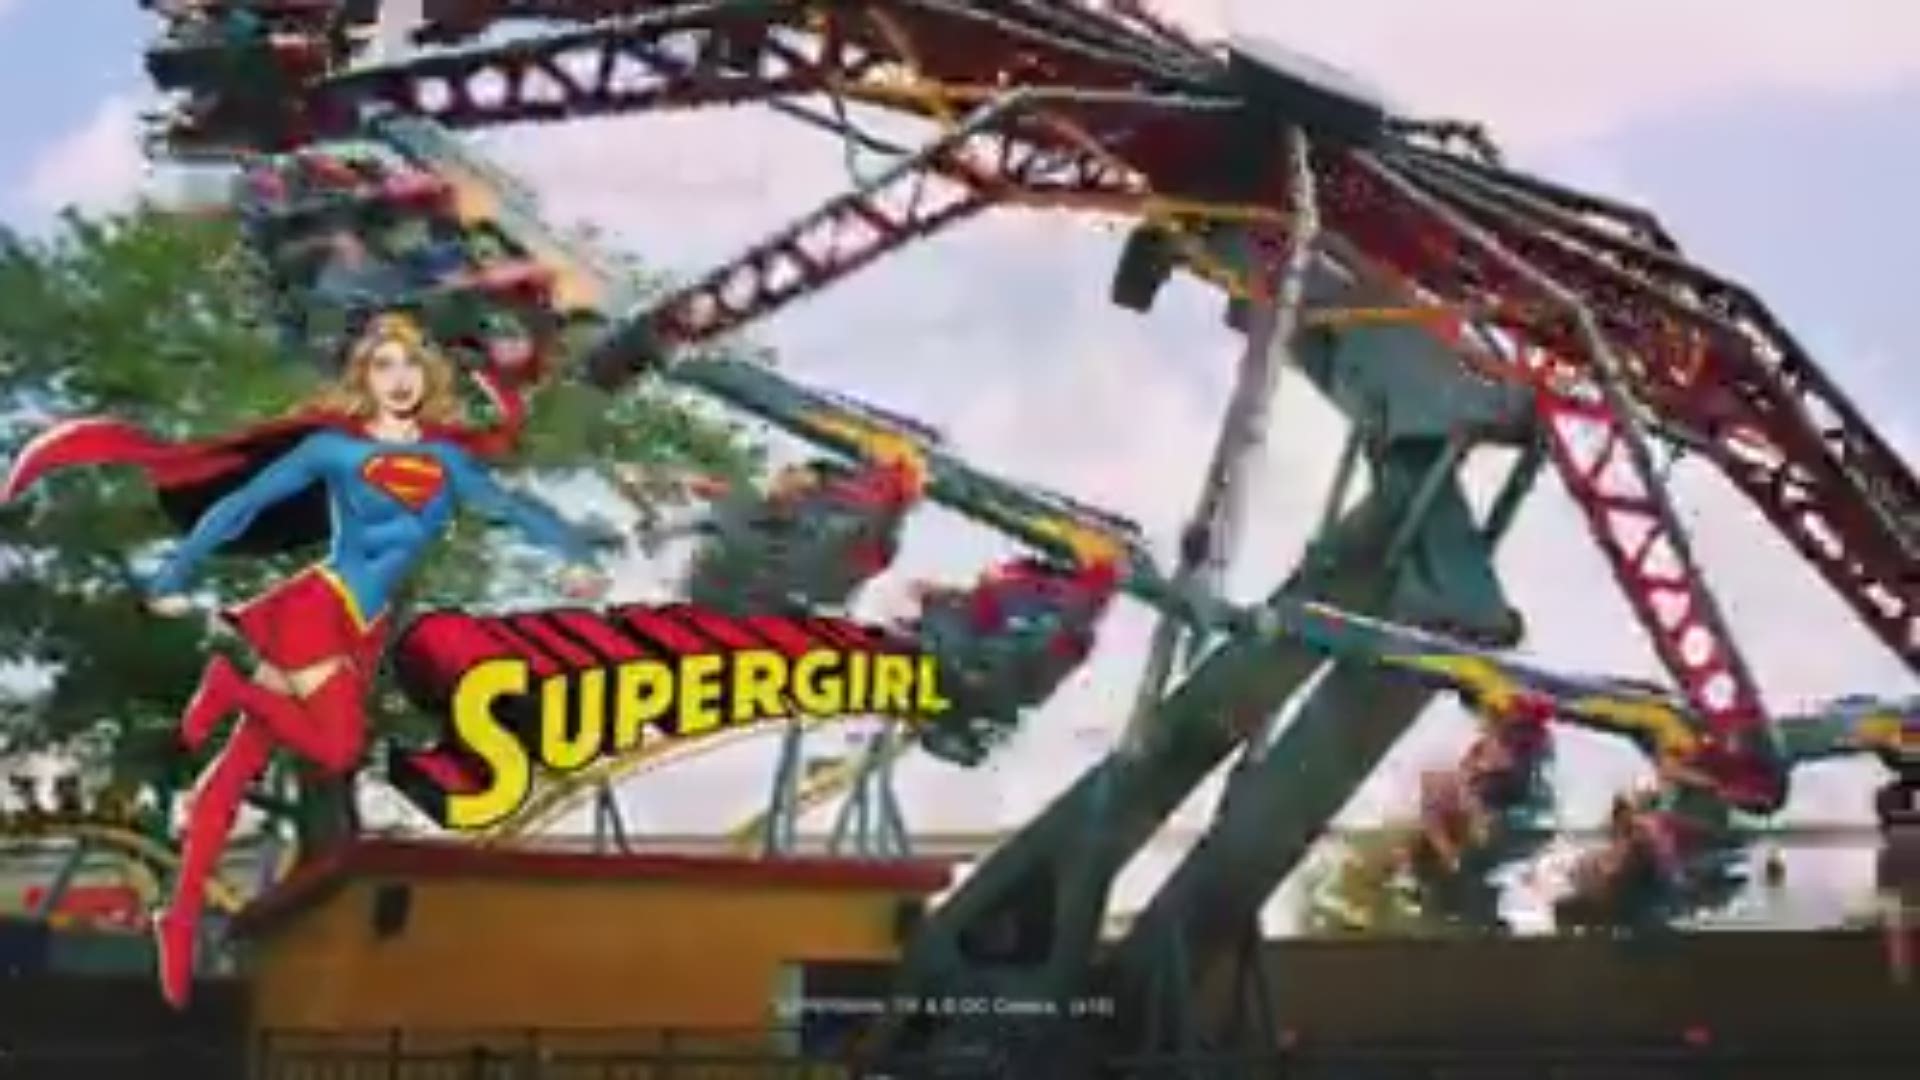 WATCH: Supergirl thrill ride at Six Flags St. Louis | www.lvbagssale.com